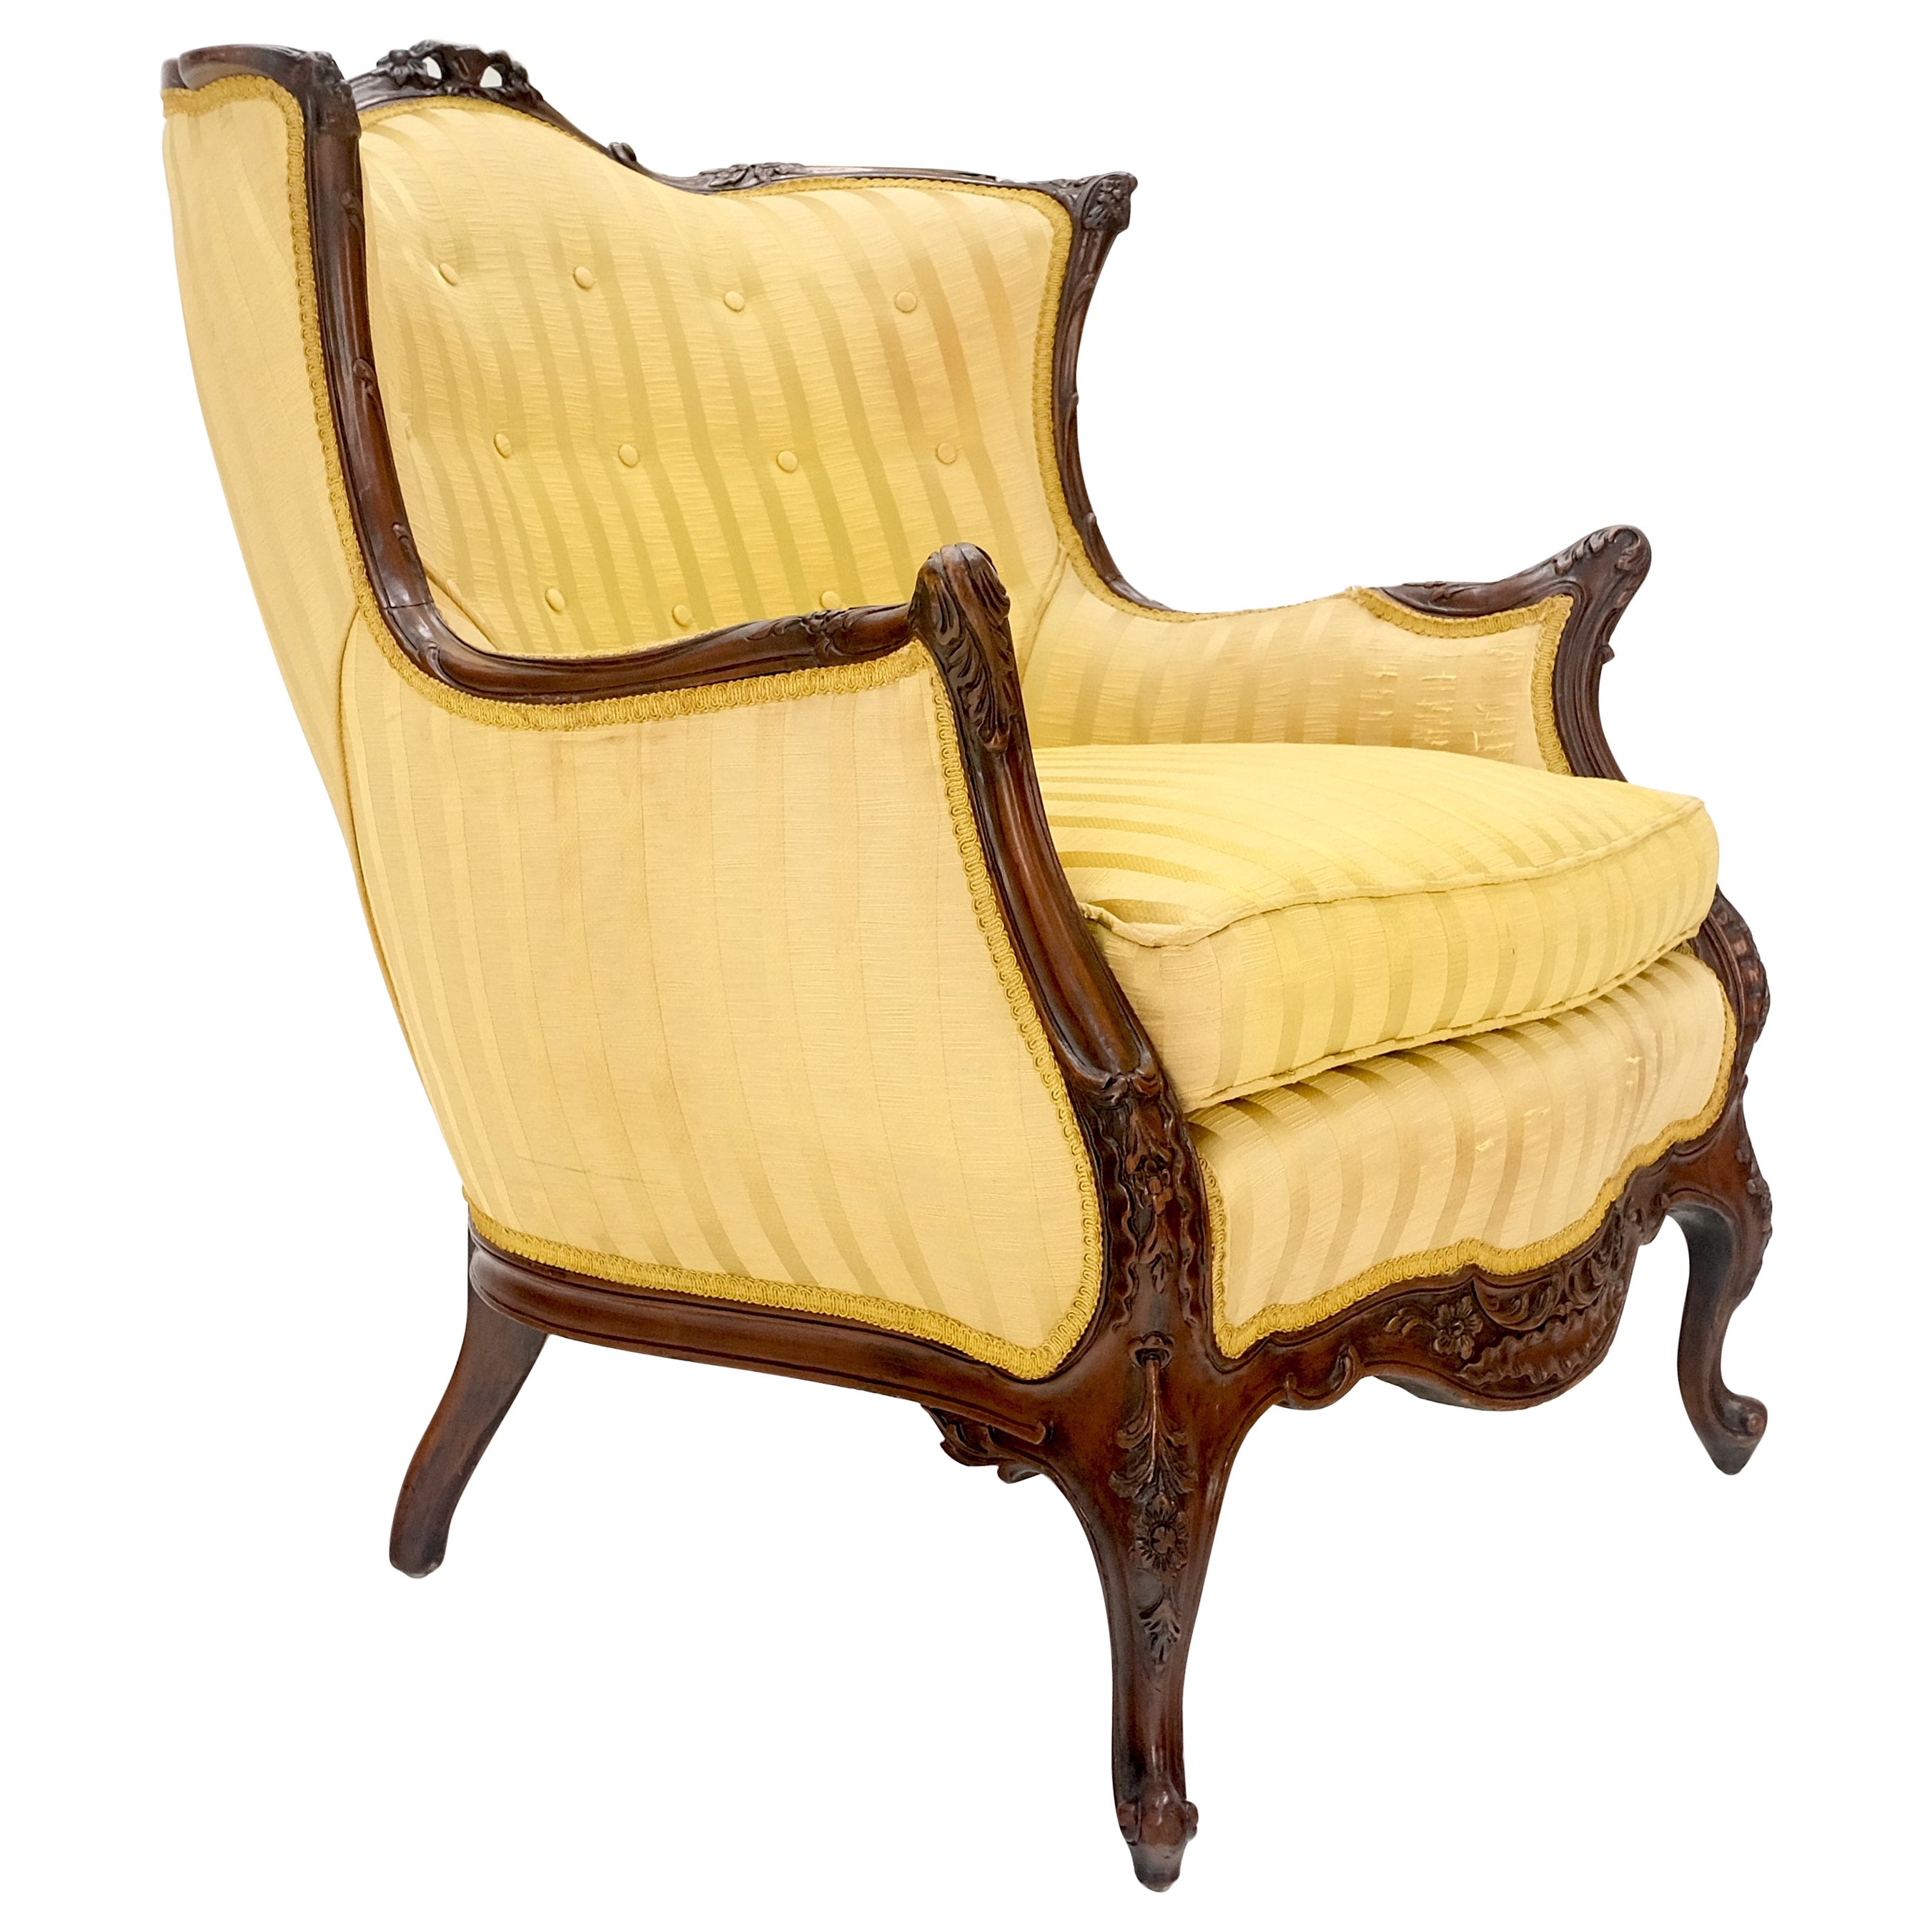 Striped Gold Upholstery Fine Deep Carved Mahogany Frame Lounge Chair Solid Frame